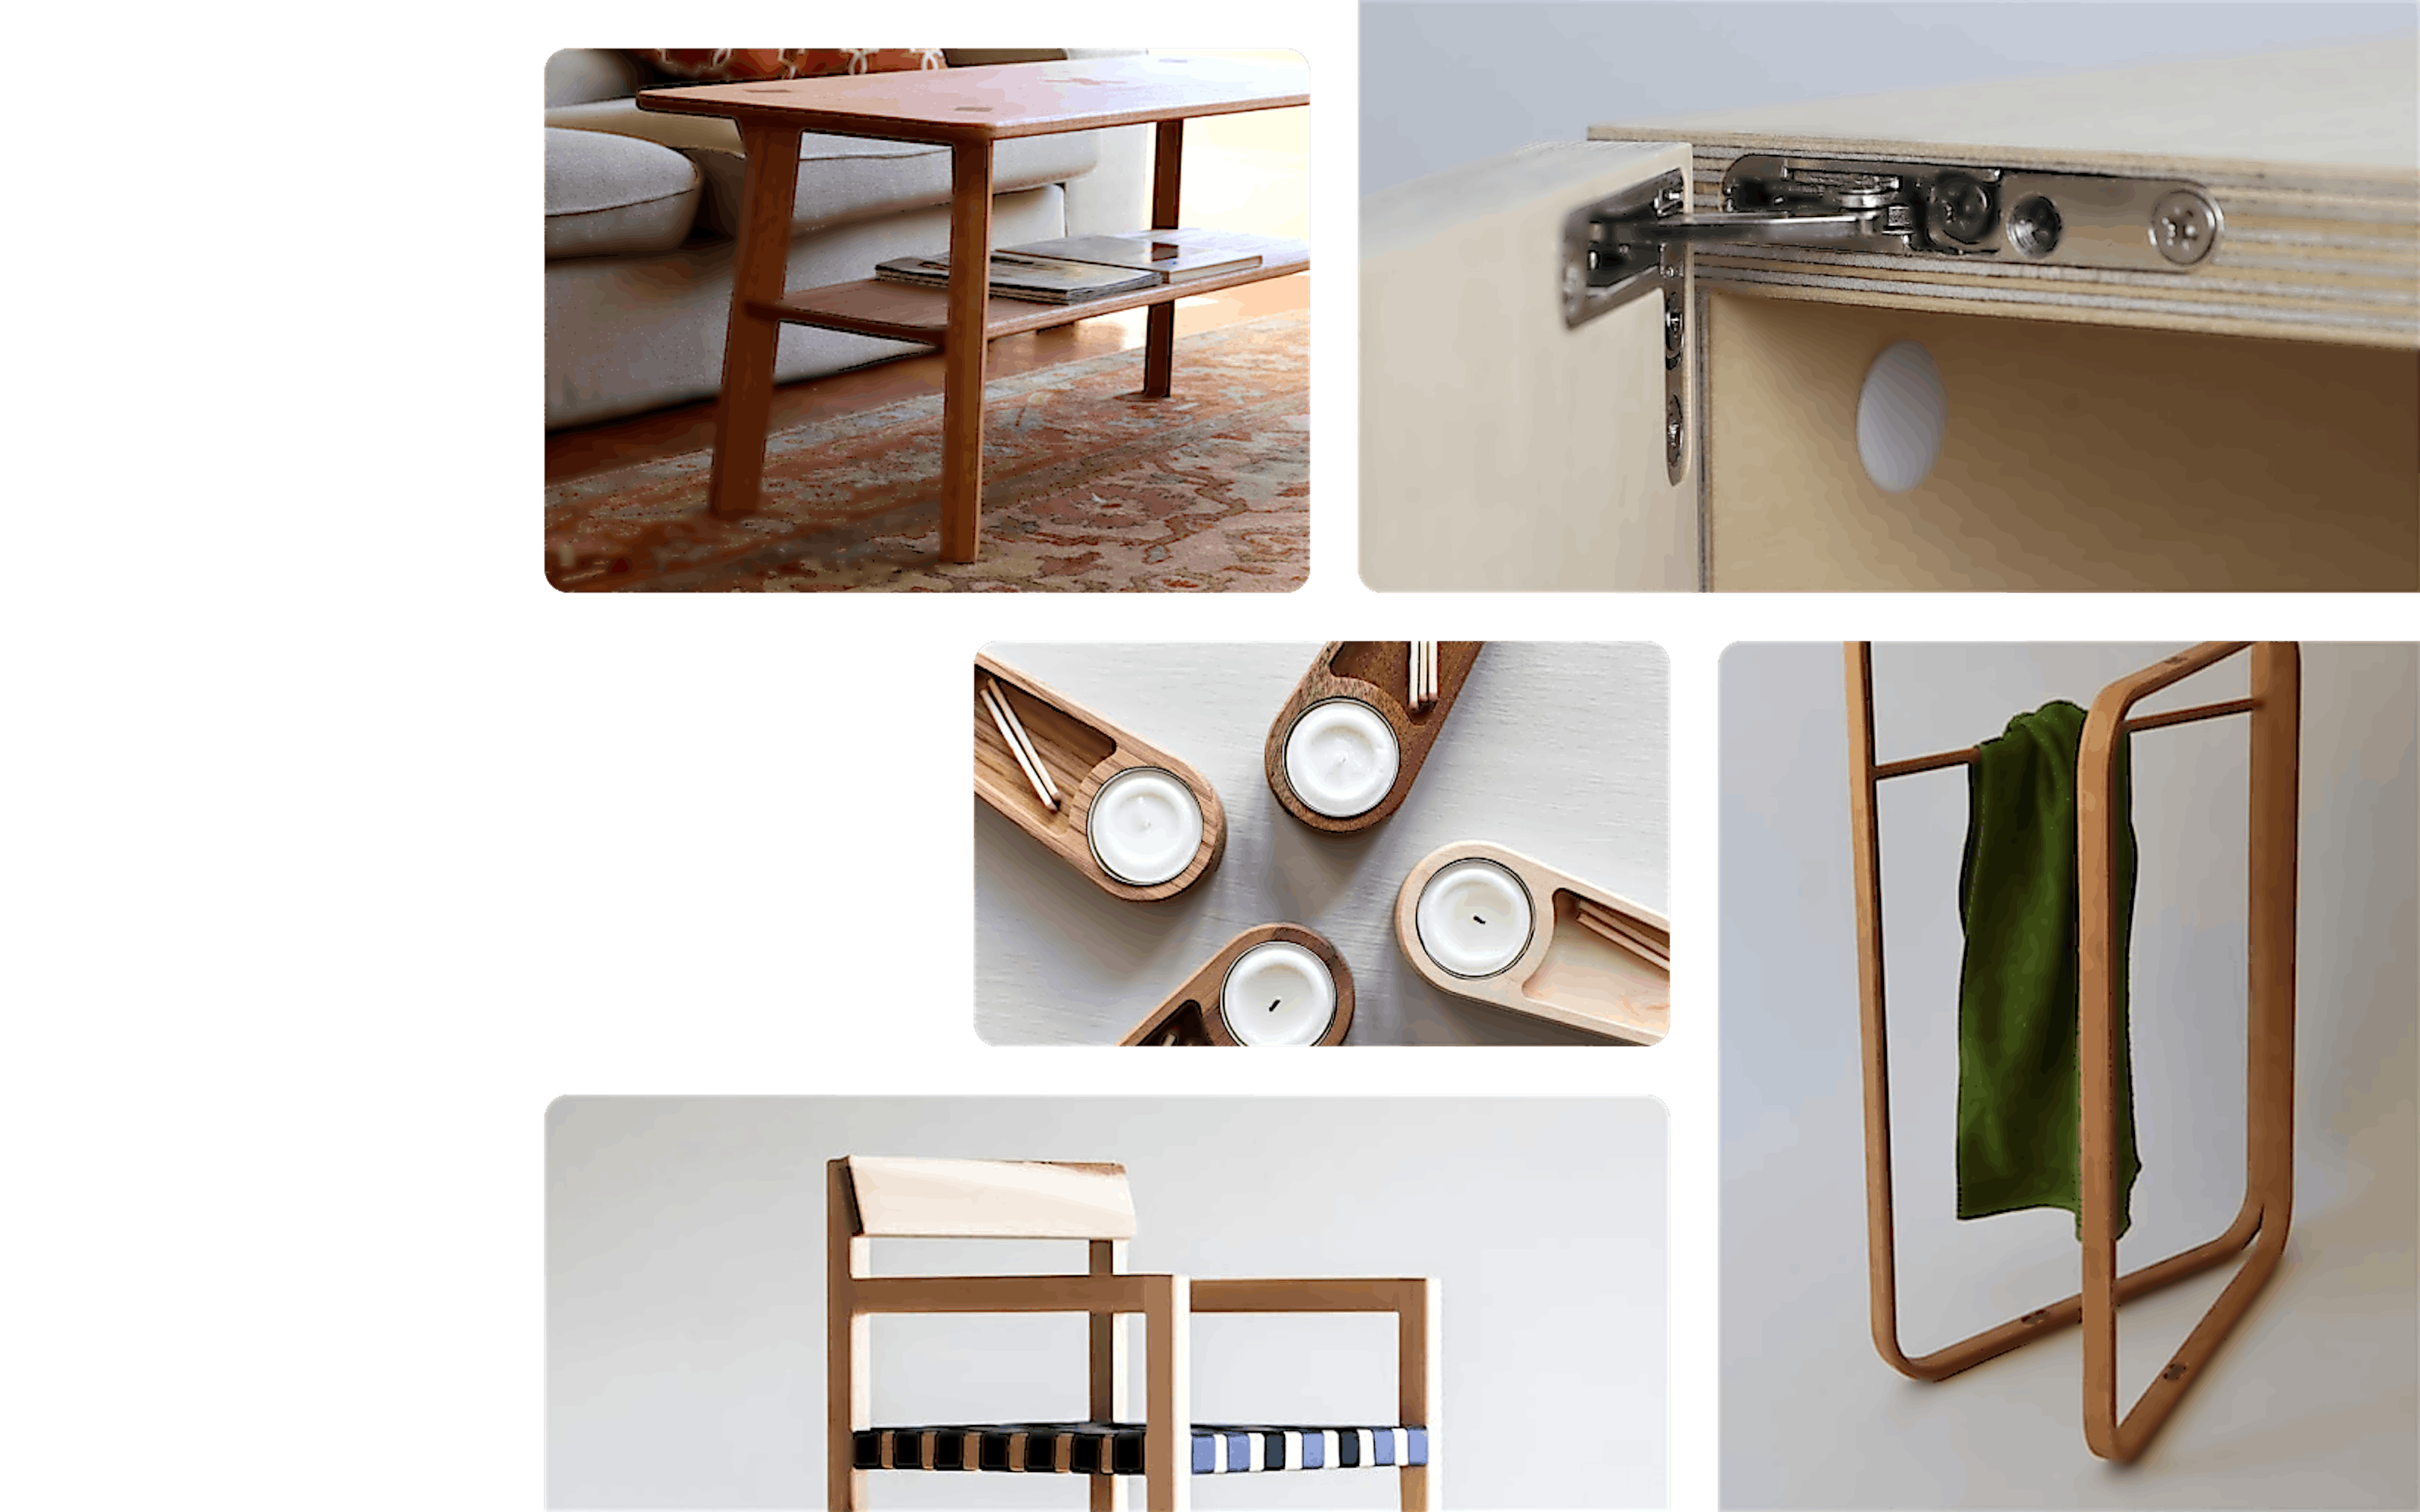 A collage of a coffee table, a cabinet hinge, towel rack, the Stock chair, and candle holders